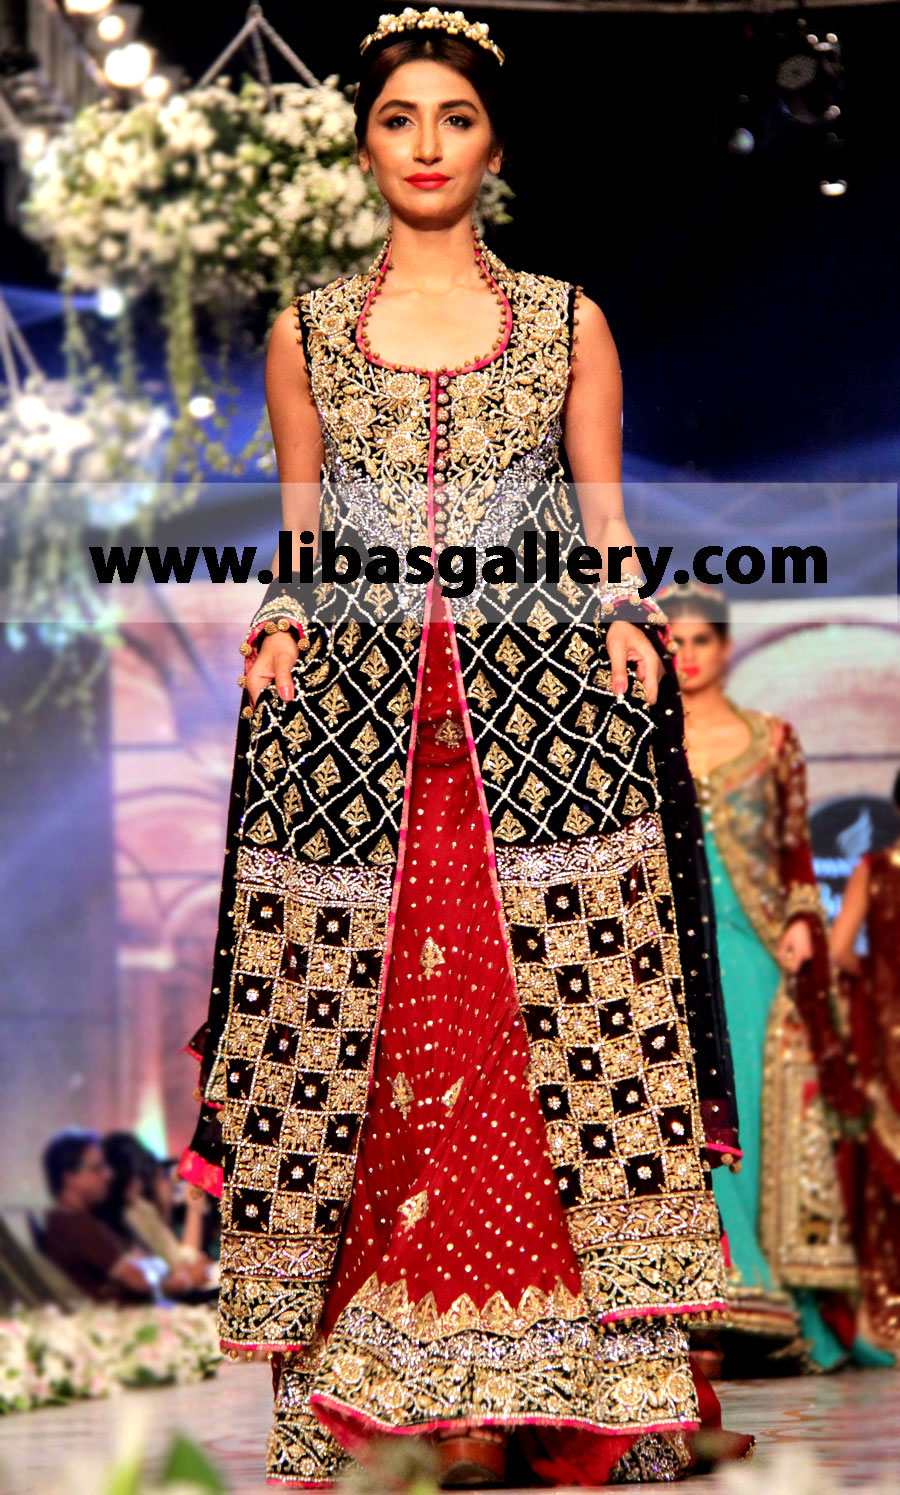 TABASSUM MUGHAL Beautiful designer bridal Wear and wedding dresses for your big day TABASSUM MUGHAL Collection At Pantene Bridal Couture Week 2014 in Florida, Pennsylvania and Georgia,USA